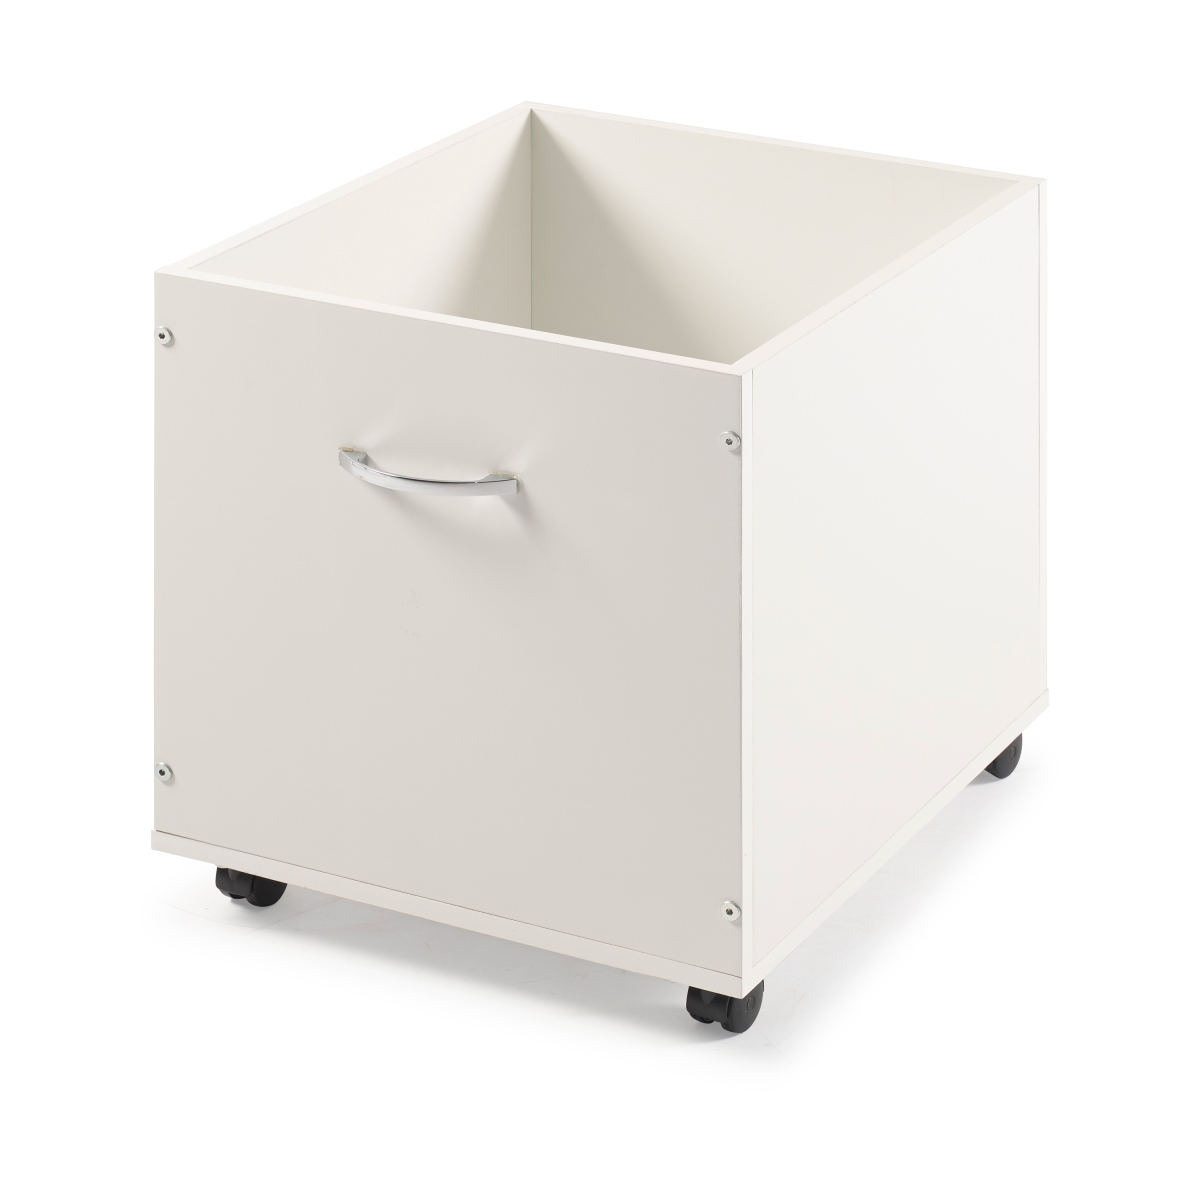 Picture of Pivot Direct PD-5000-DGW Two Tone Toy Box in Grey & White